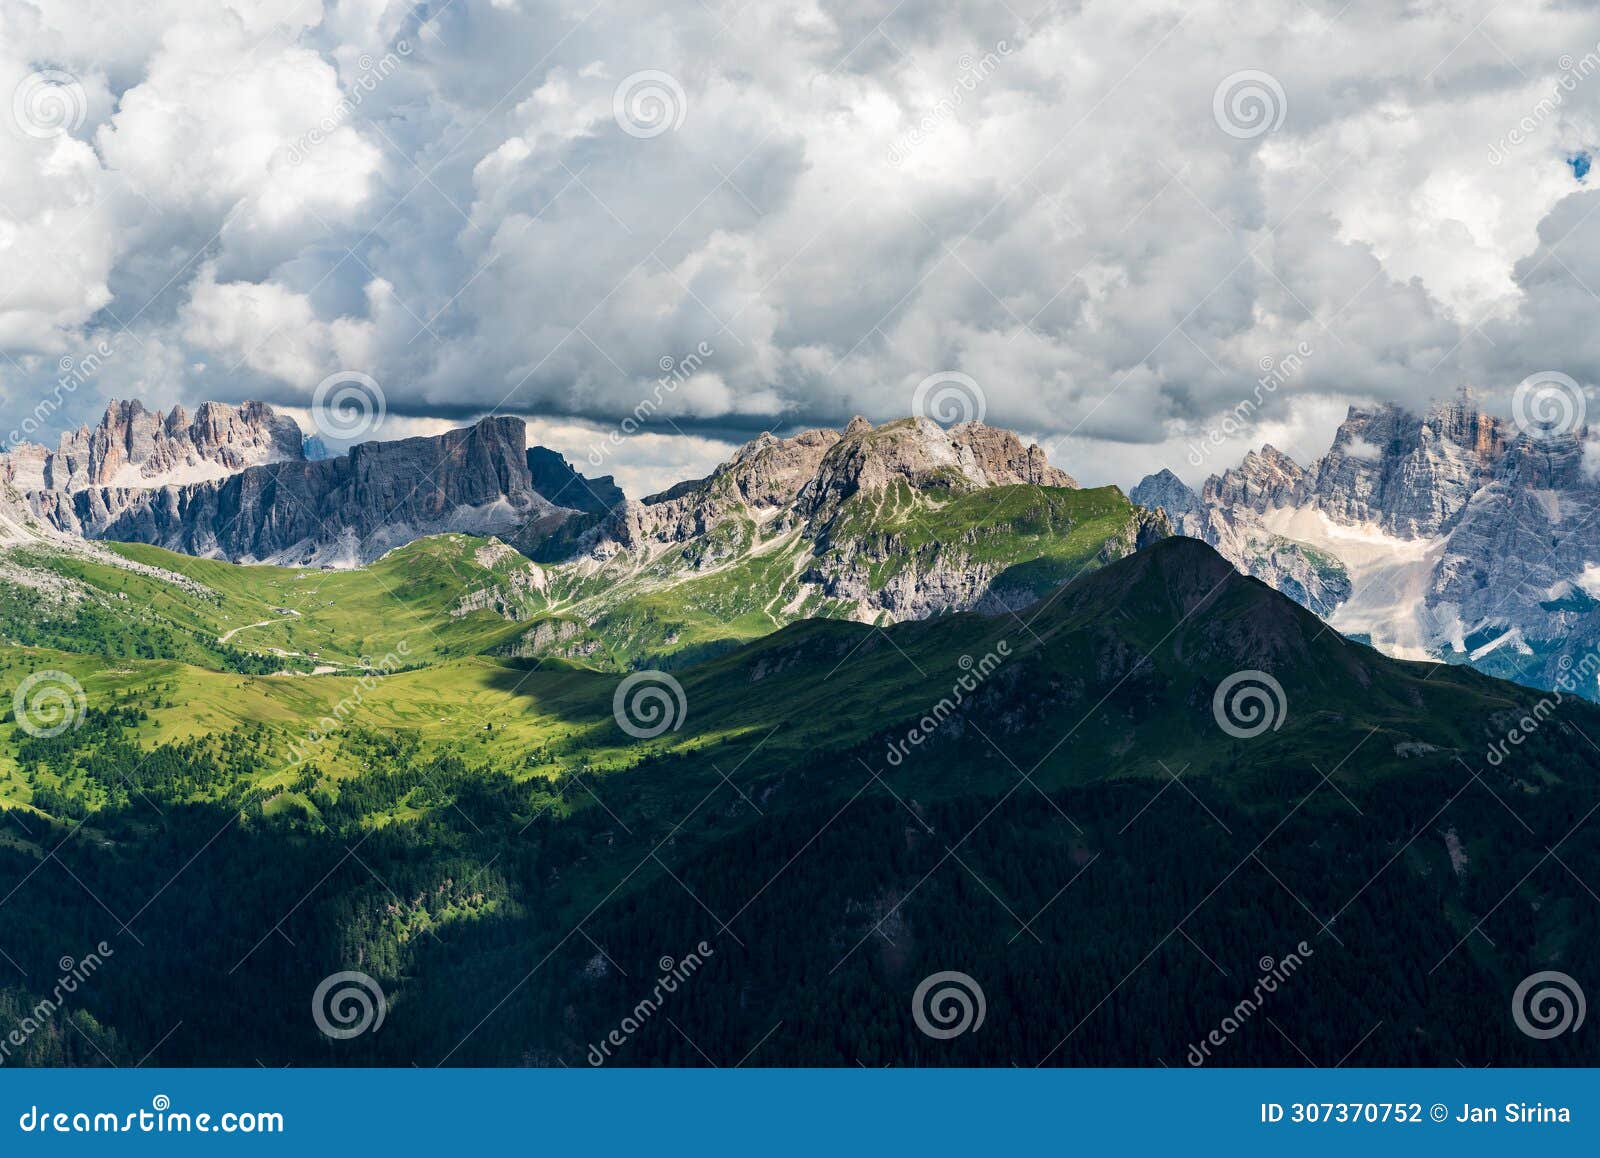 beautiful dolomites mountains in italy - view from col di lana hill